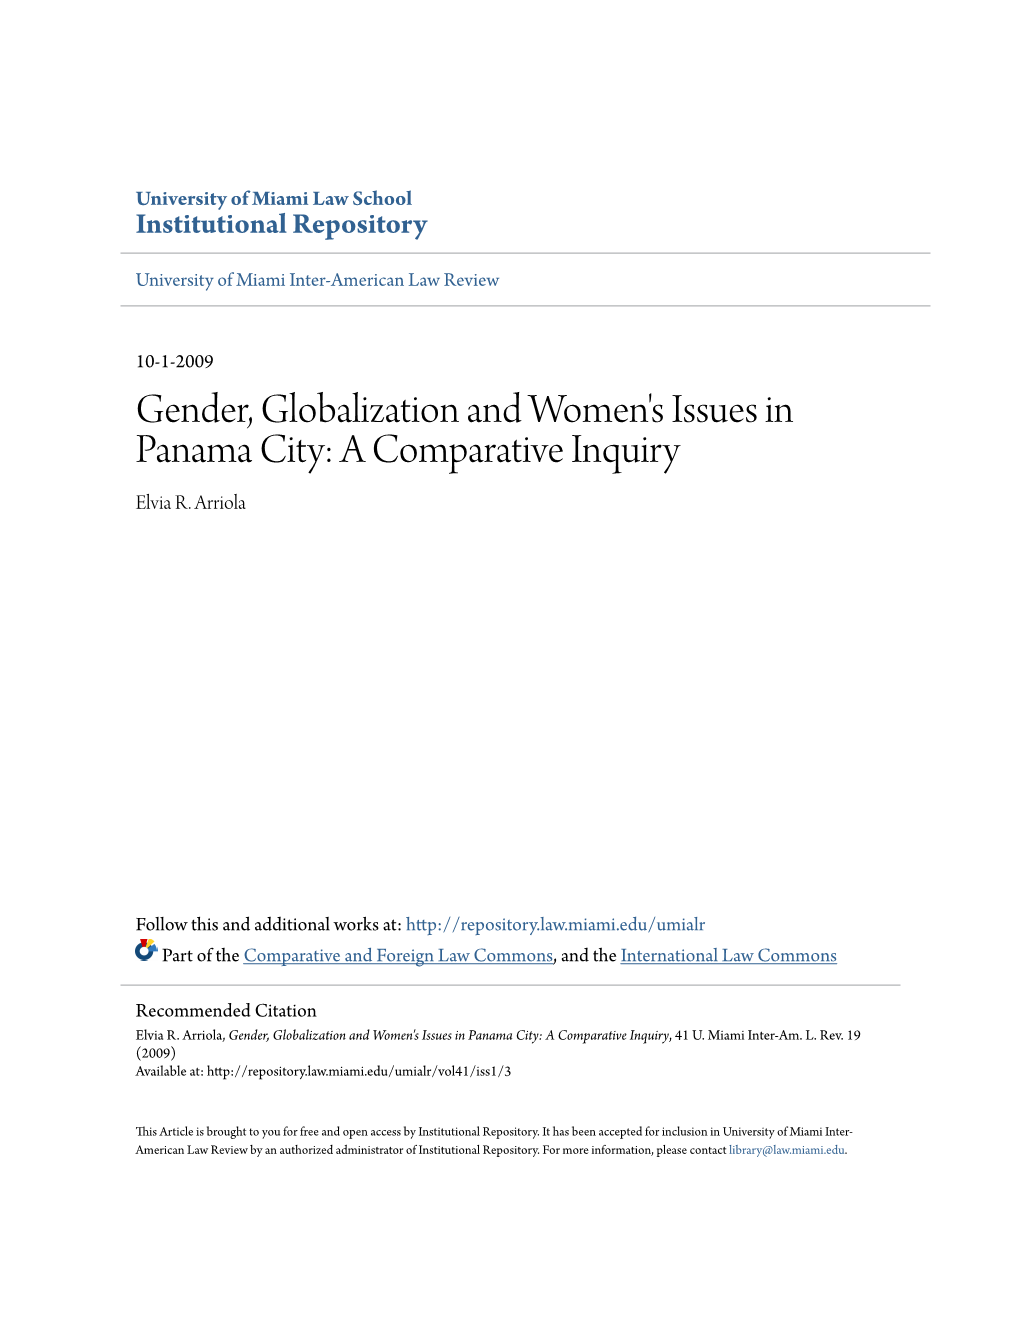 Gender, Globalization and Women's Issues in Panama City: a Comparative Inquiry Elvia R